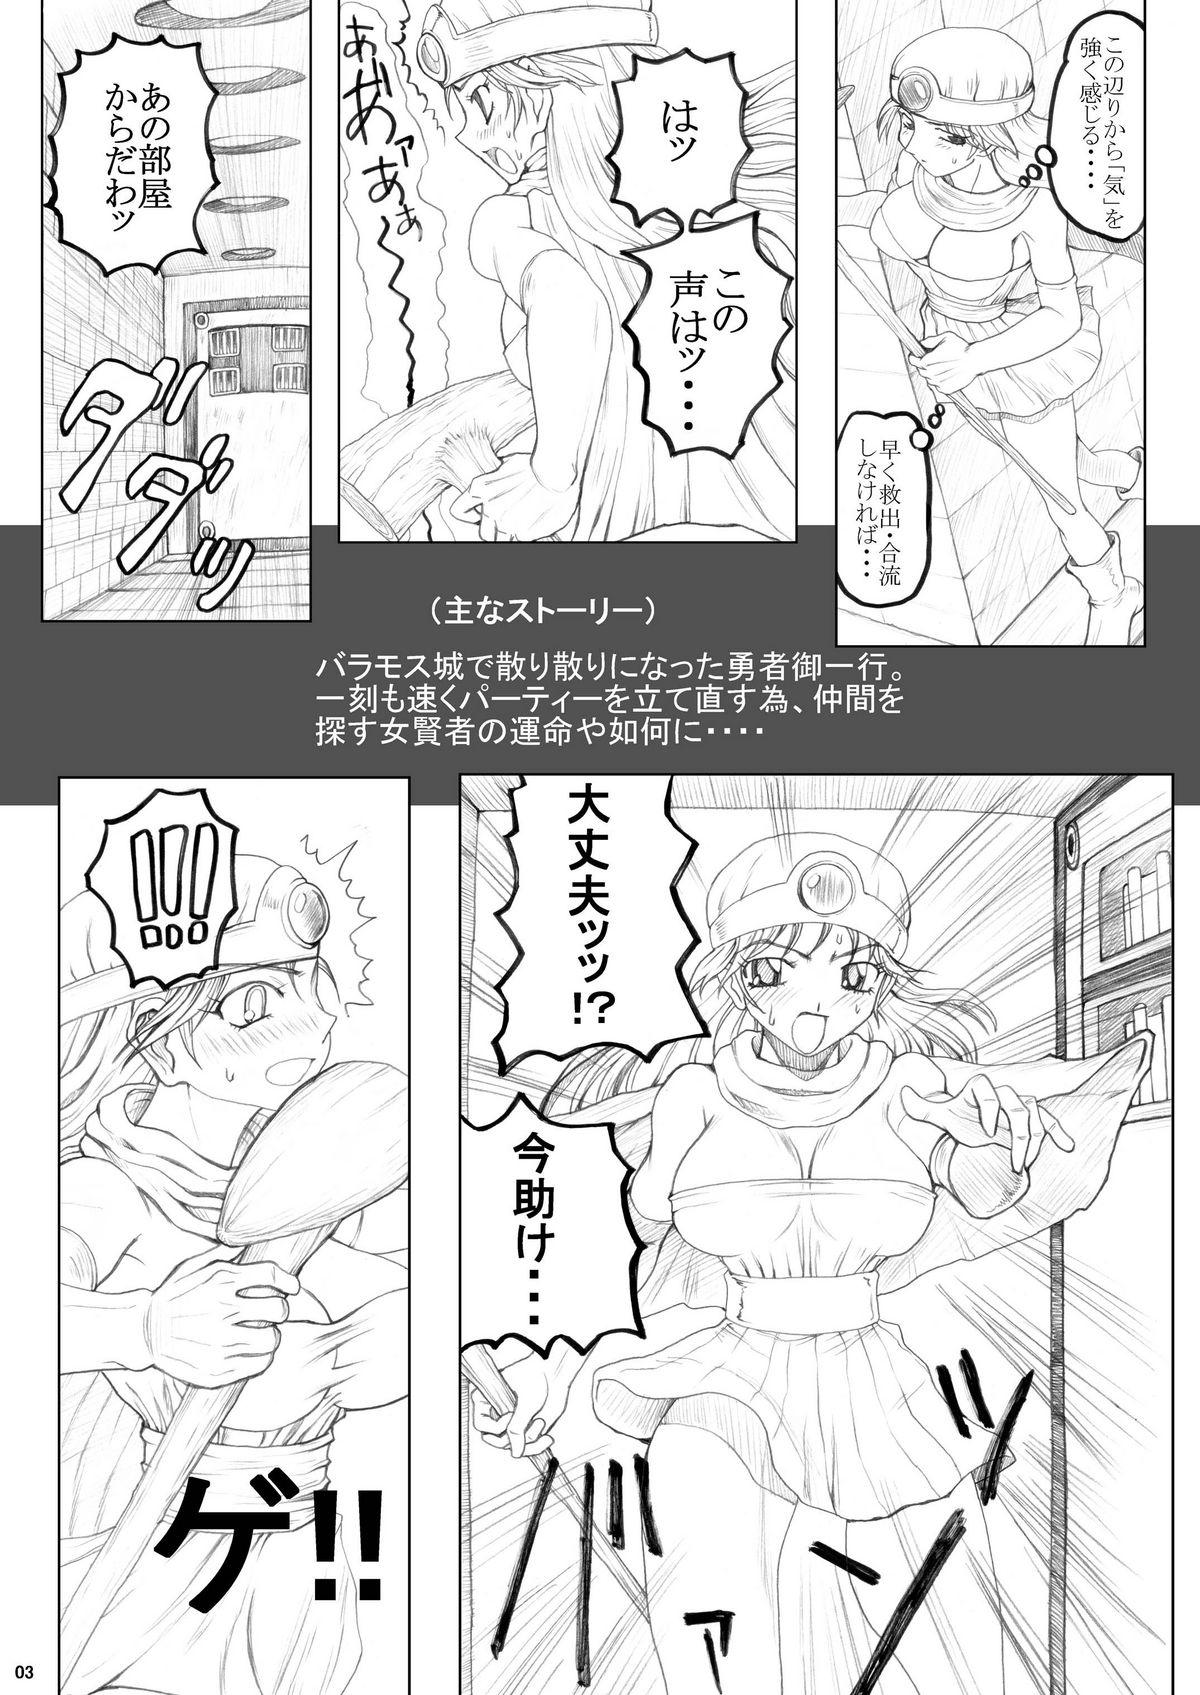 Reversecowgirl Eikyuushi - Dragon quest iii  - Page 3